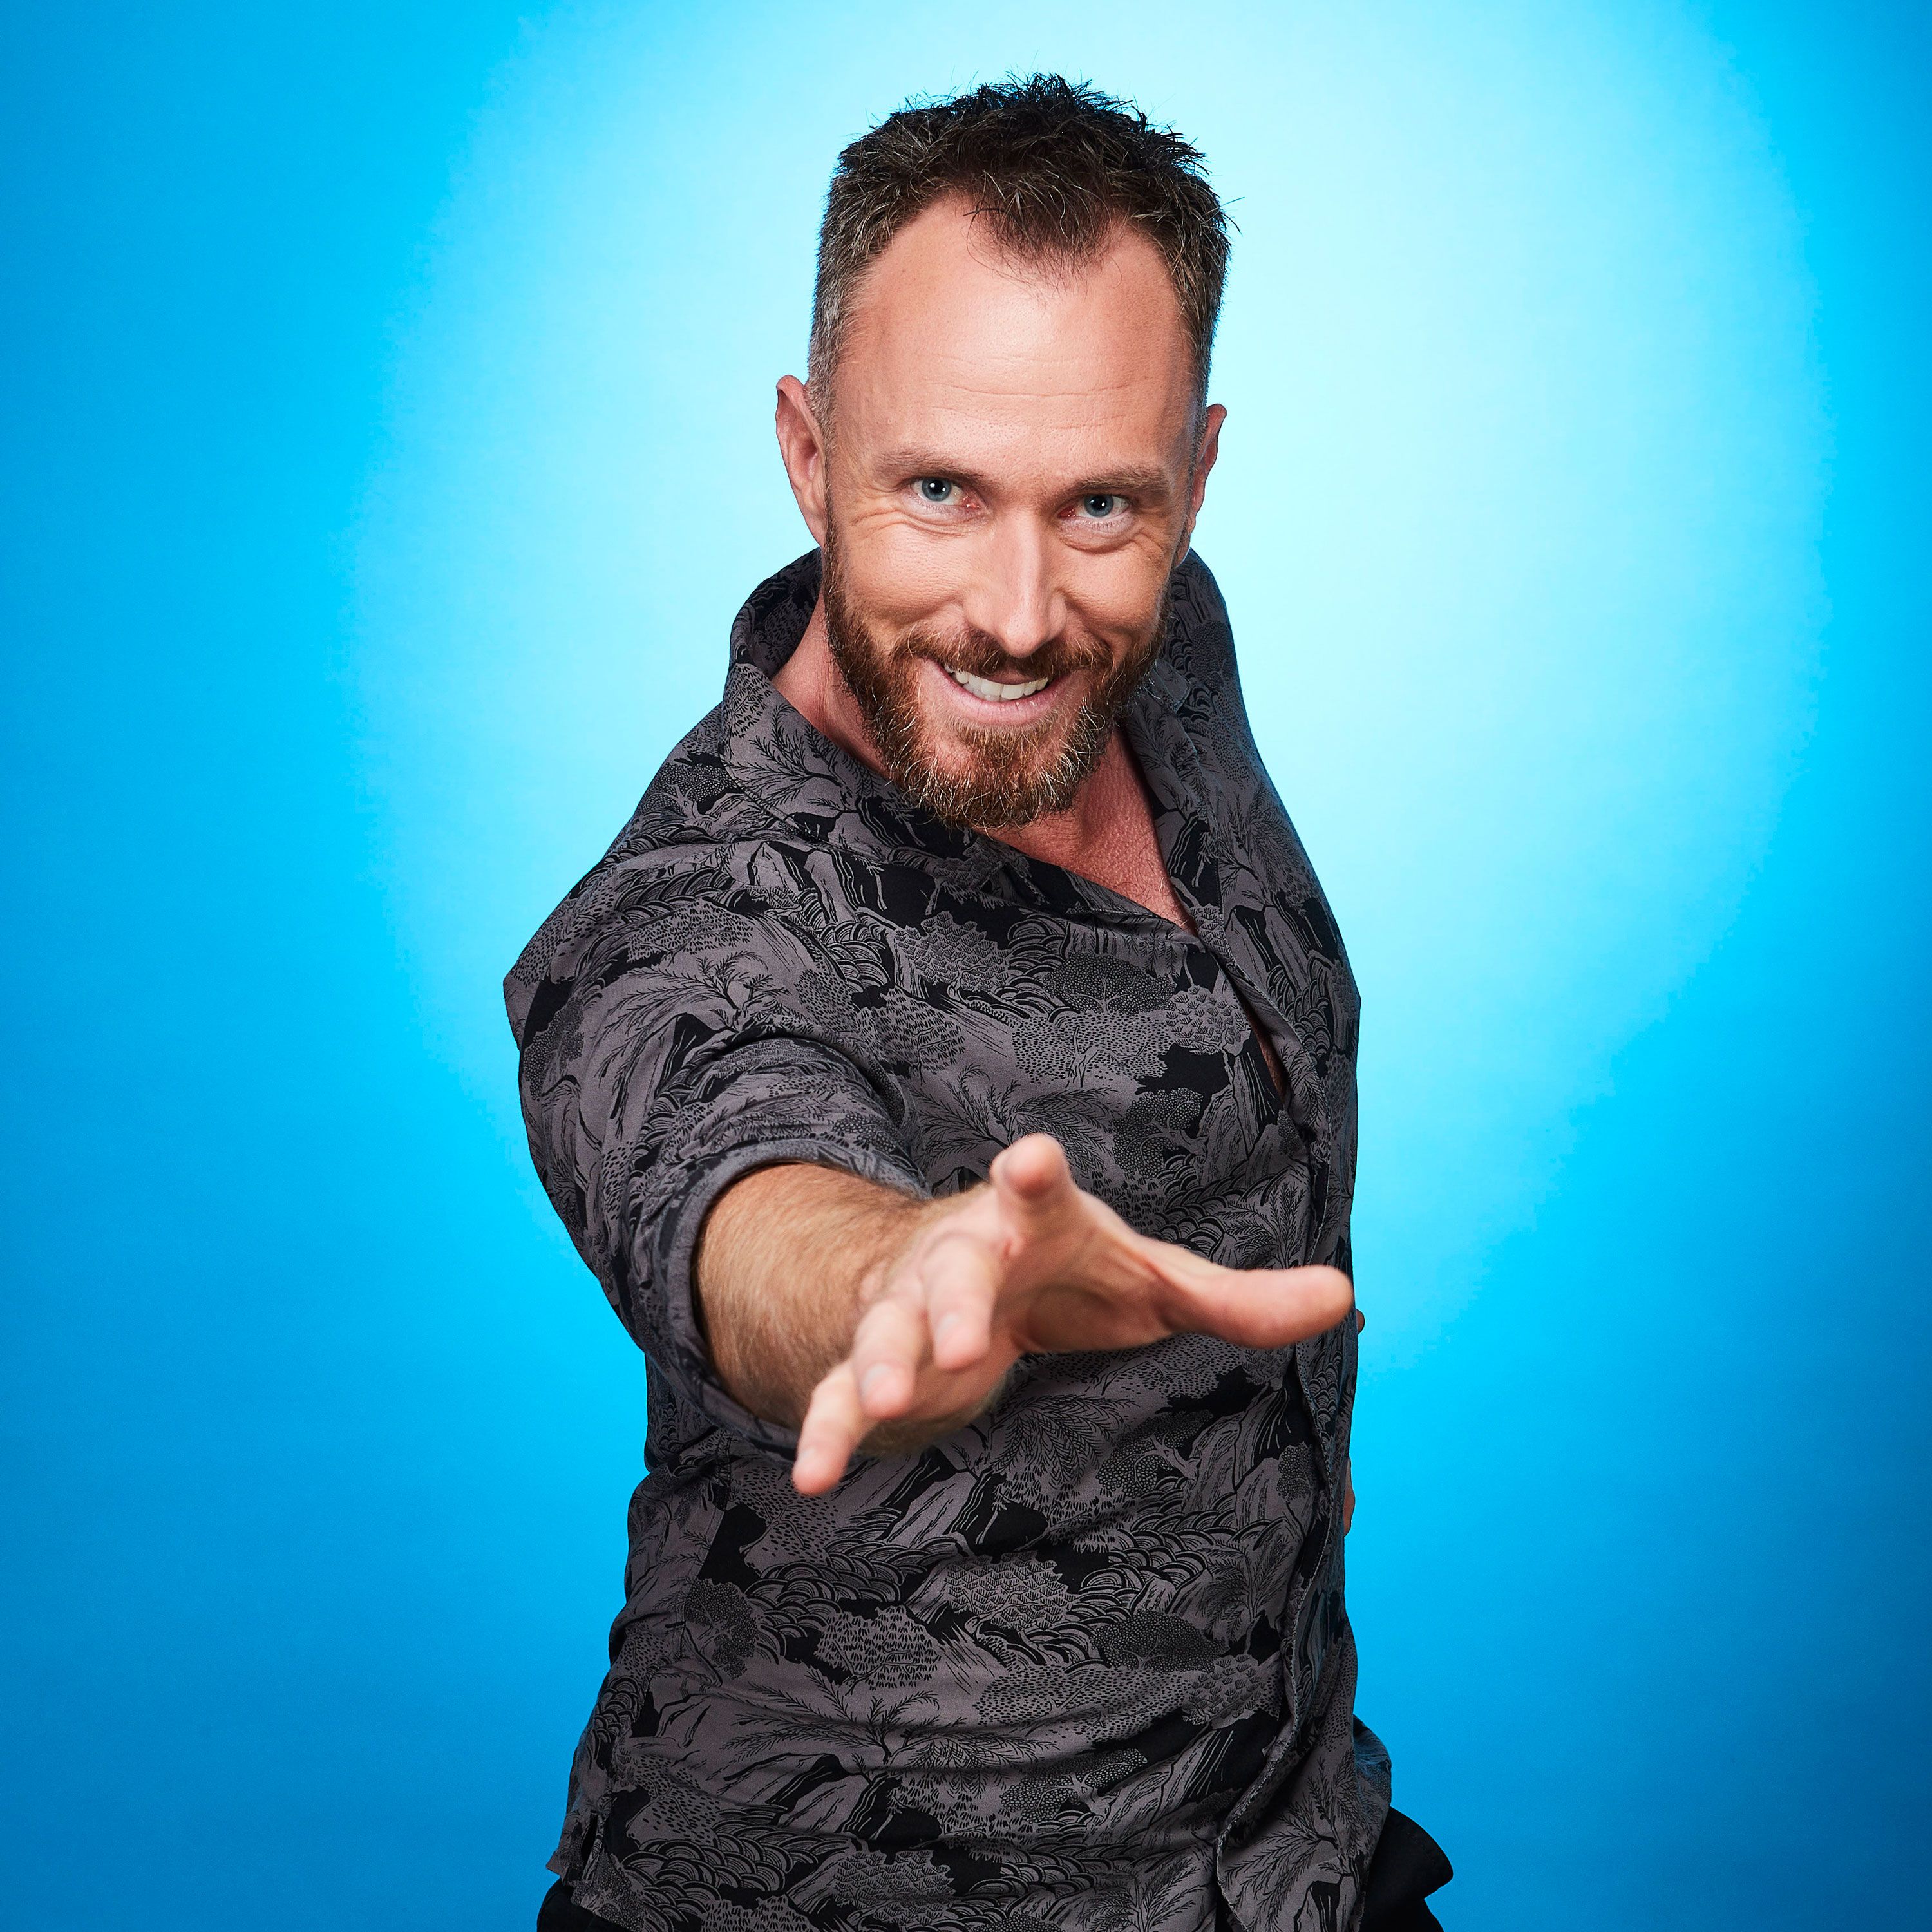 James Jordan admits he DOES have an advantage on Dancing on Ice